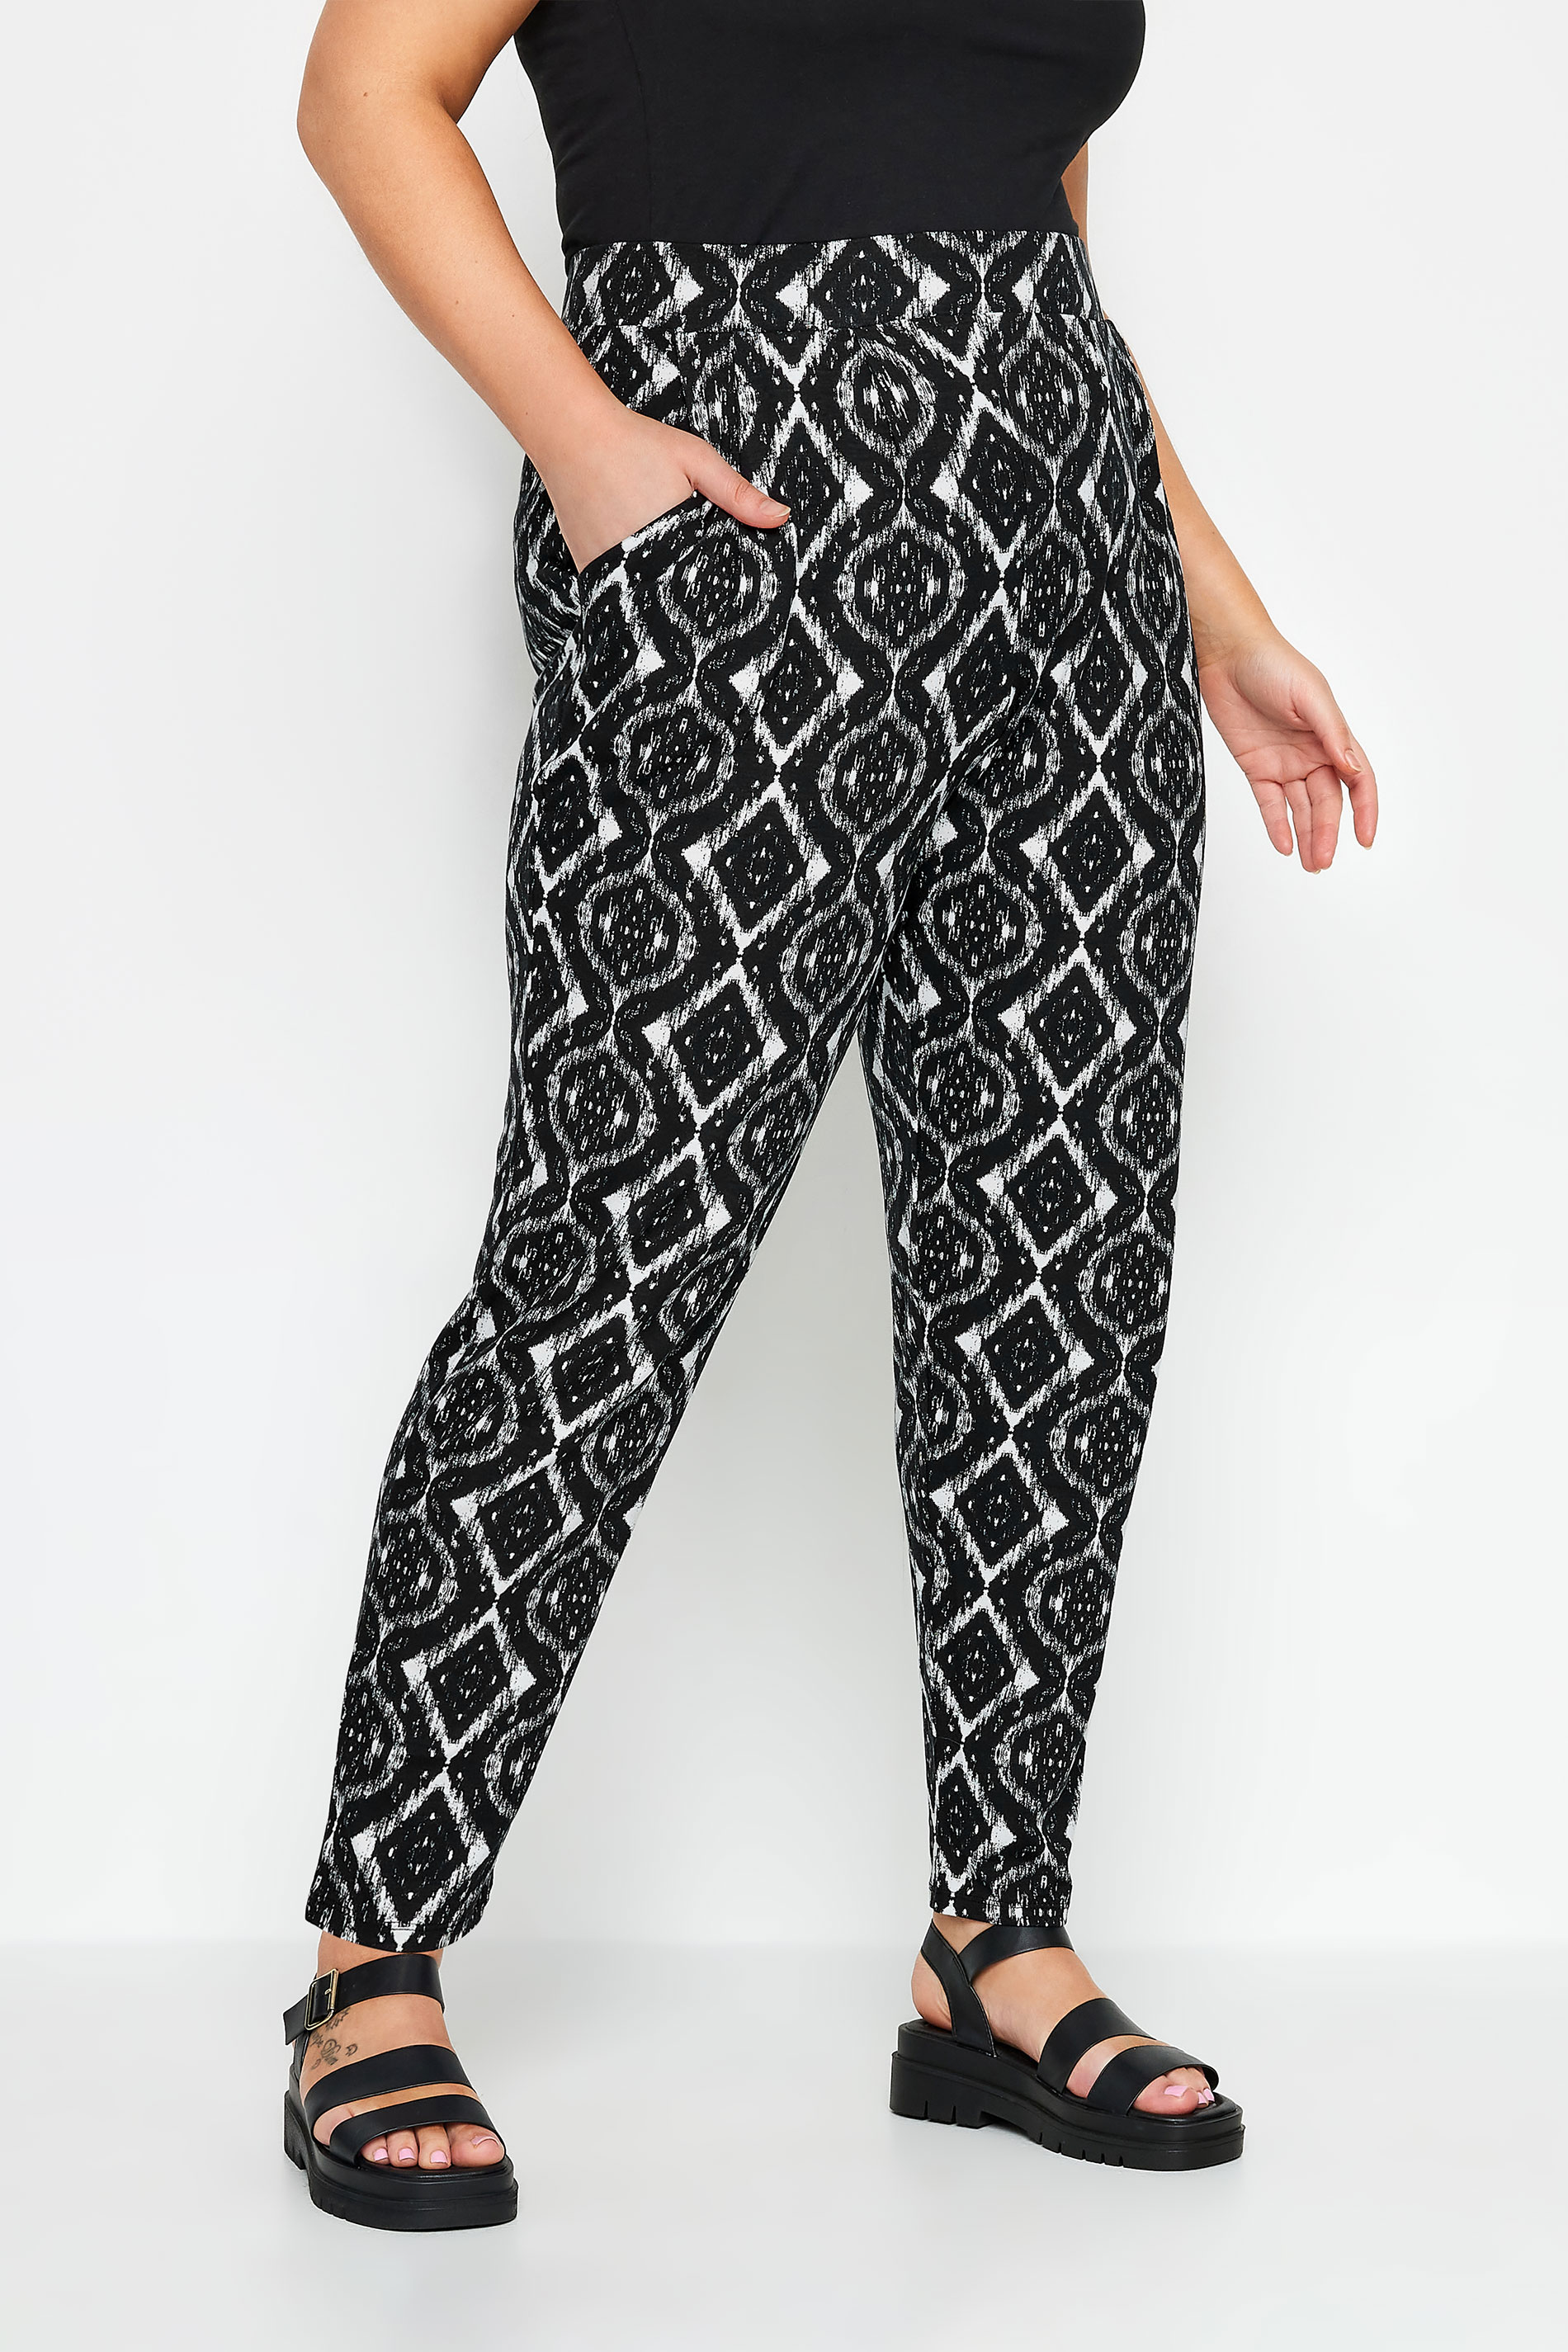 YOURS Plus Size Black Harem Trousers | Yours Clothing 1